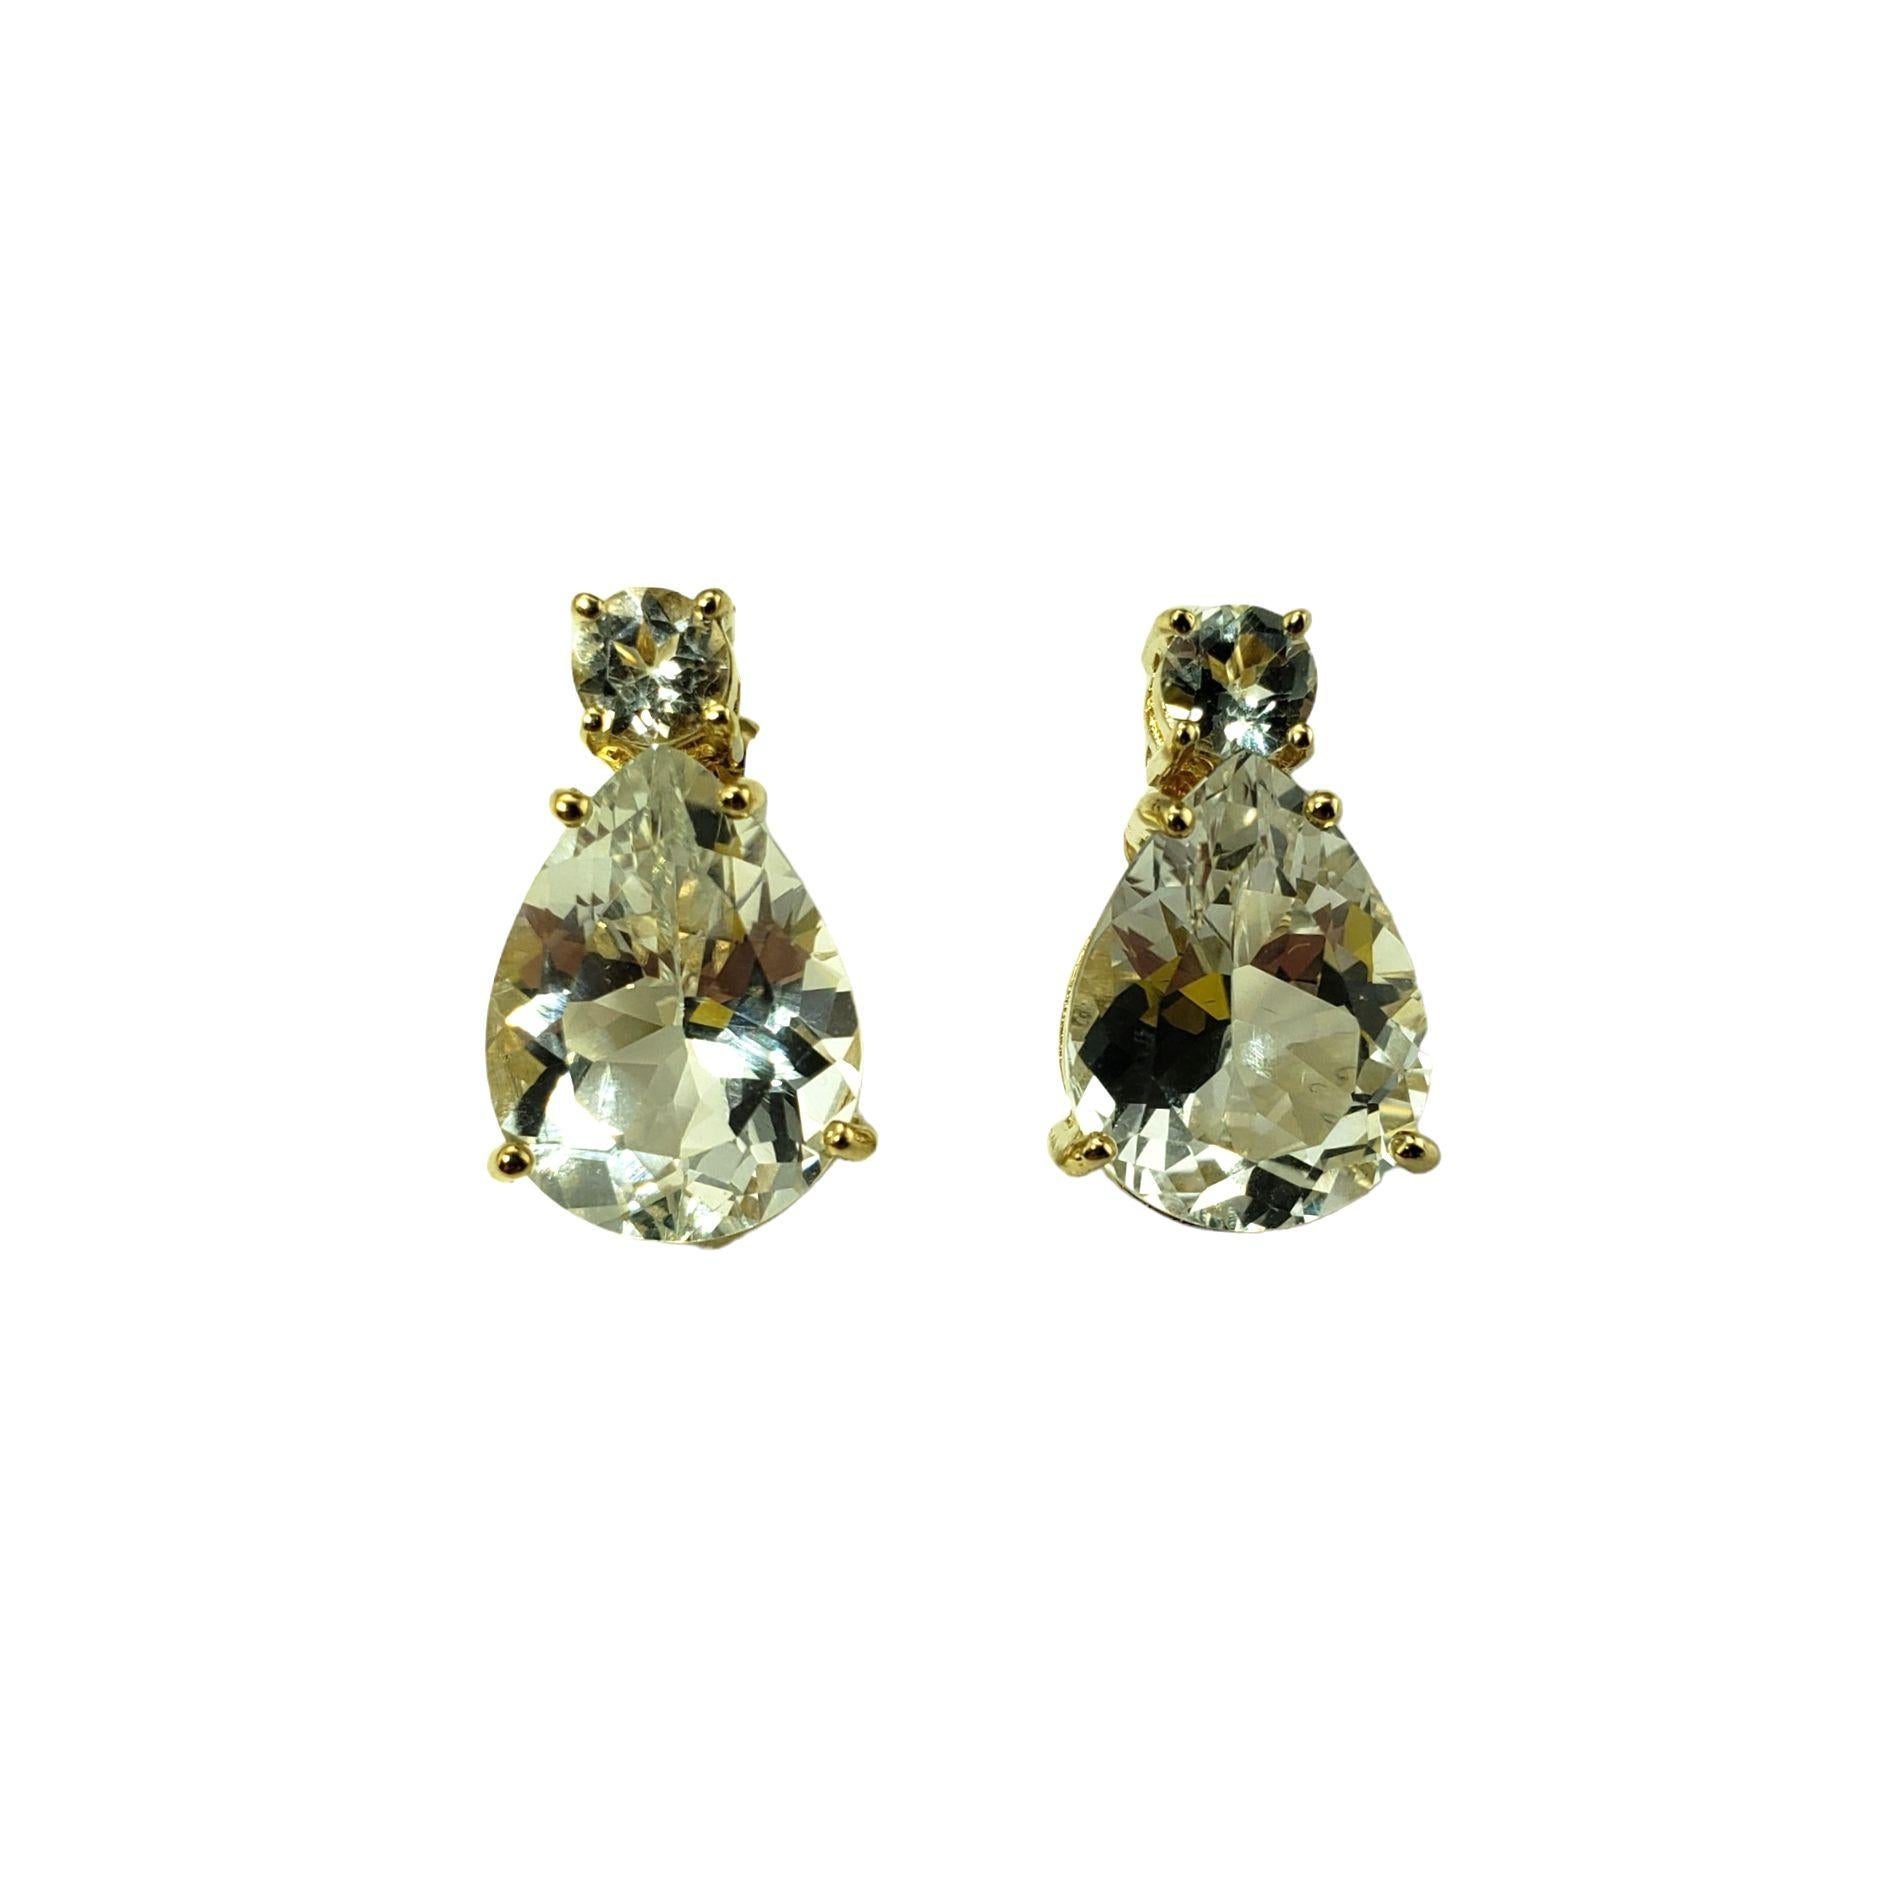 10 Karat Yellow Gold and White Topaz Earrings #13338 In Good Condition For Sale In Washington Depot, CT